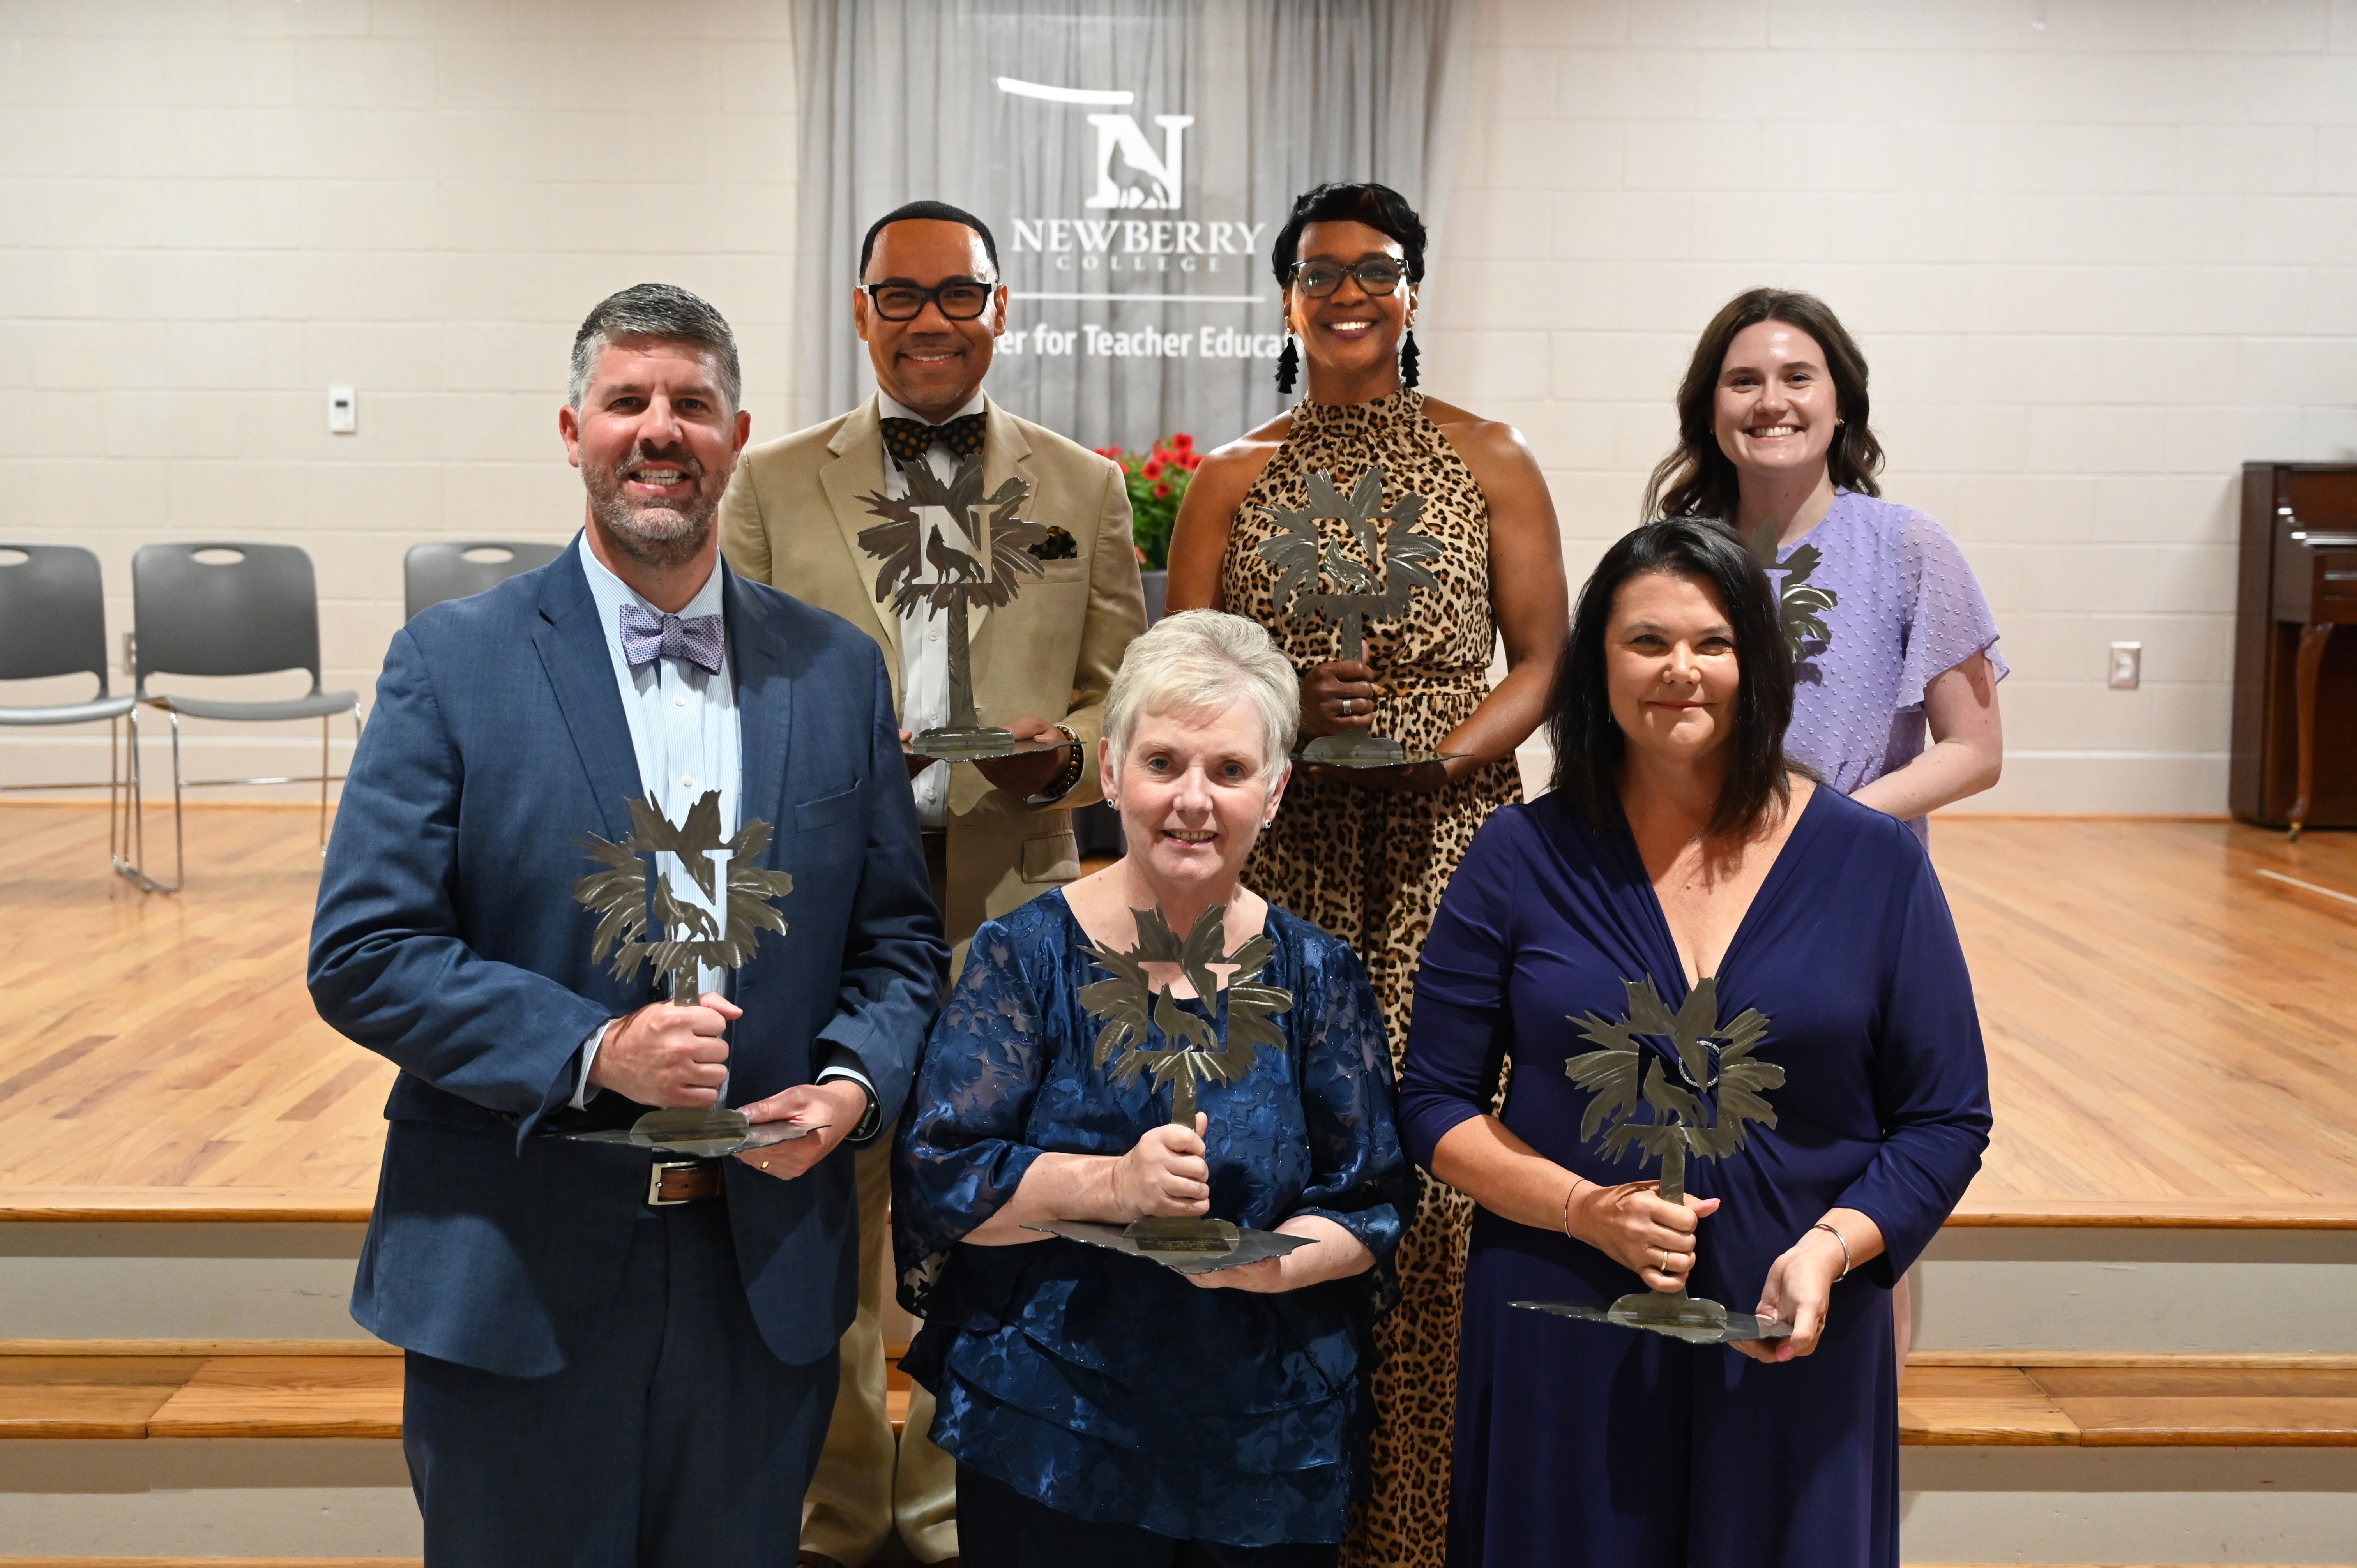 Photo: Back (left to right): Dr. Reggie Wicker '04, Kim Taylor '85, Hannah Carnes '18. Front (left to right): Dr. Andrew McMillan '05, Anne Caughman '67, Dr. Cindy Van Buren